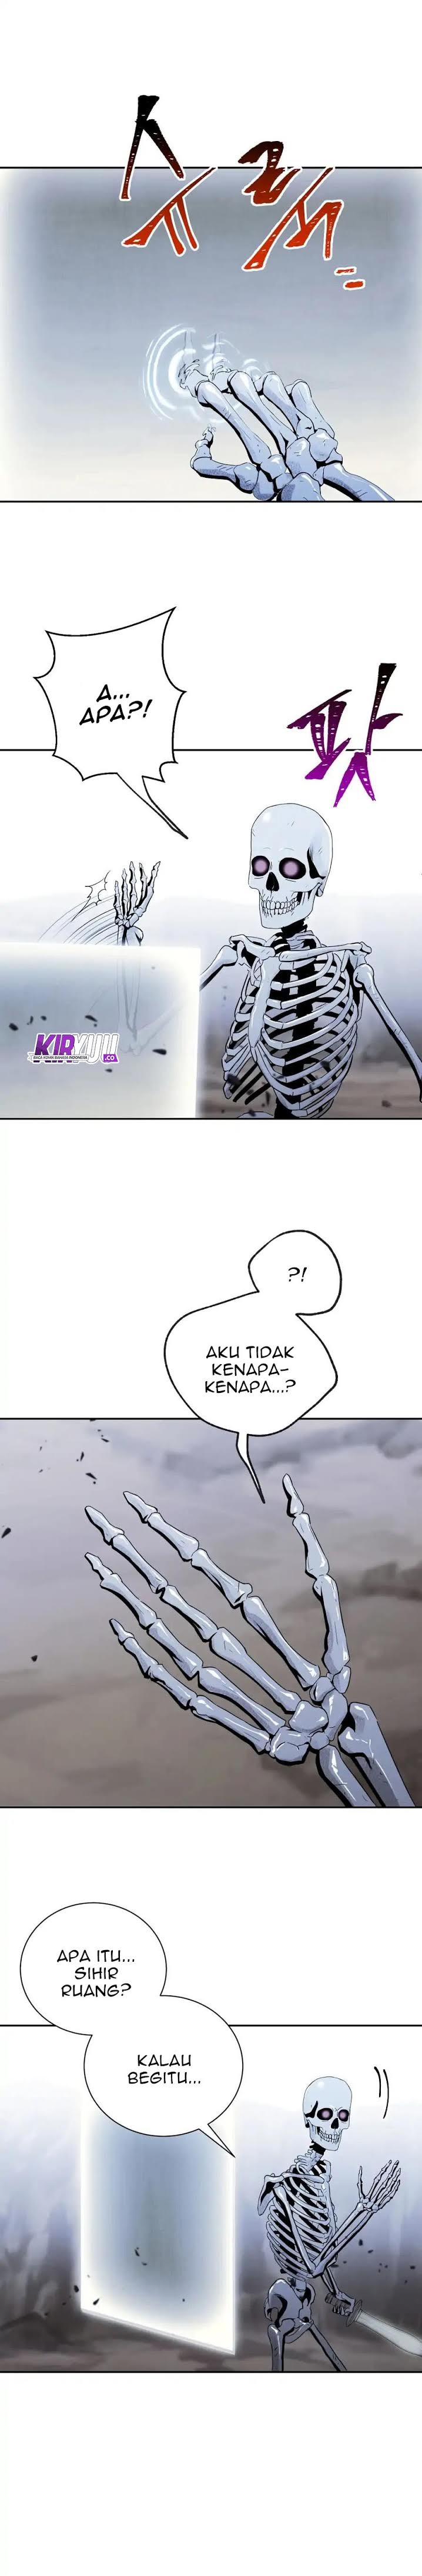 Skeleton Soldier Couldn’t Protect the Dungeon Chapter 56